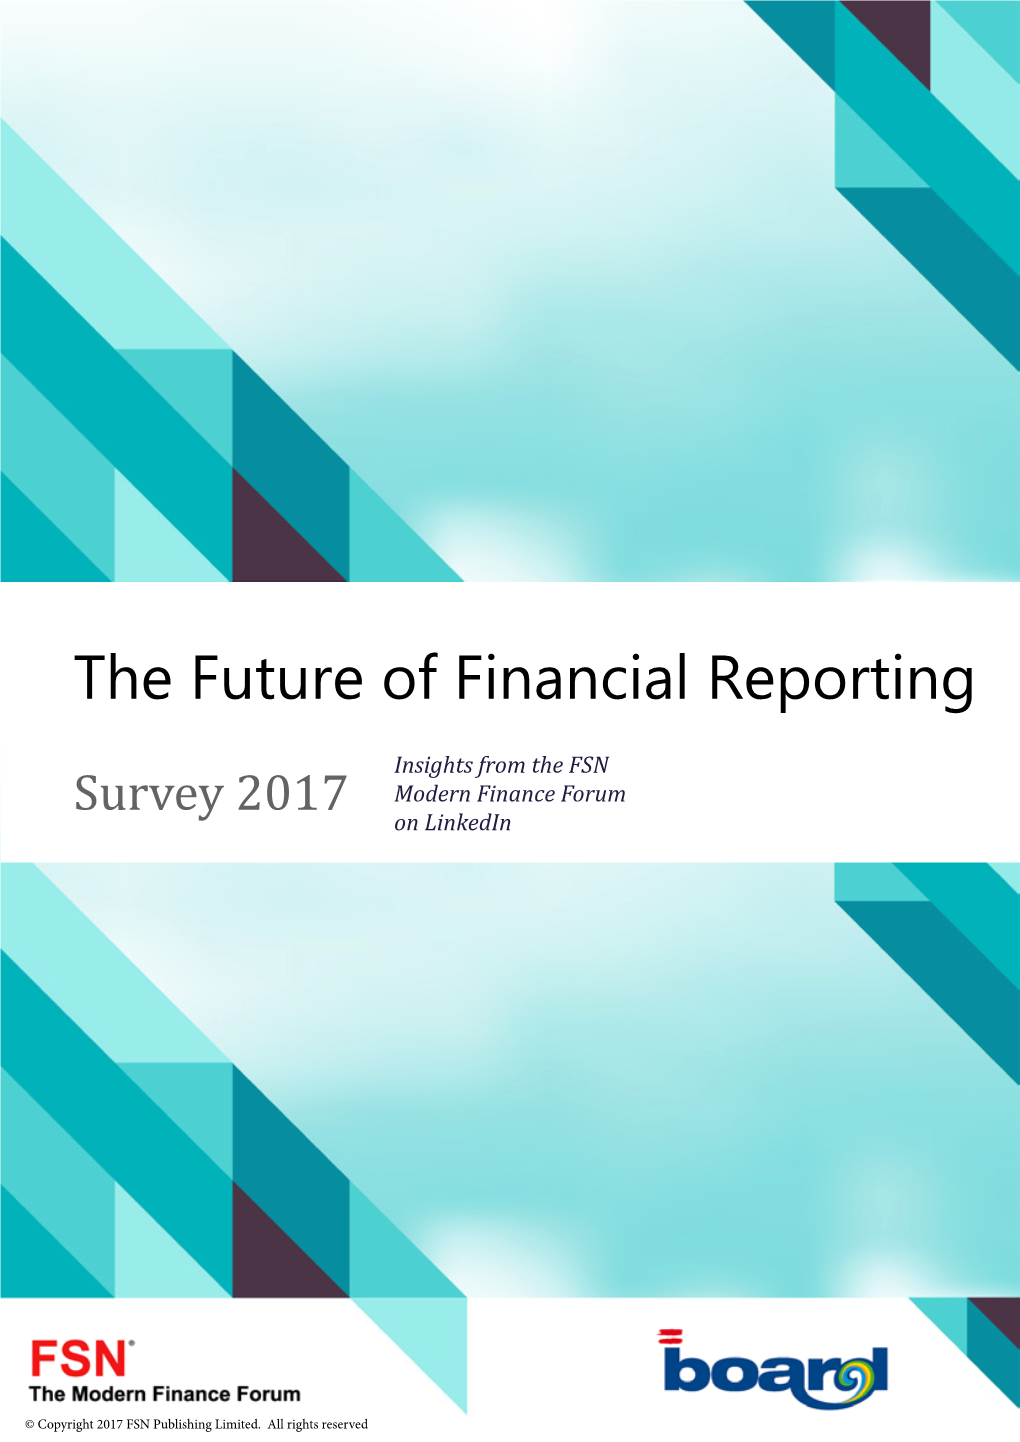 The Future of Financial Reporting